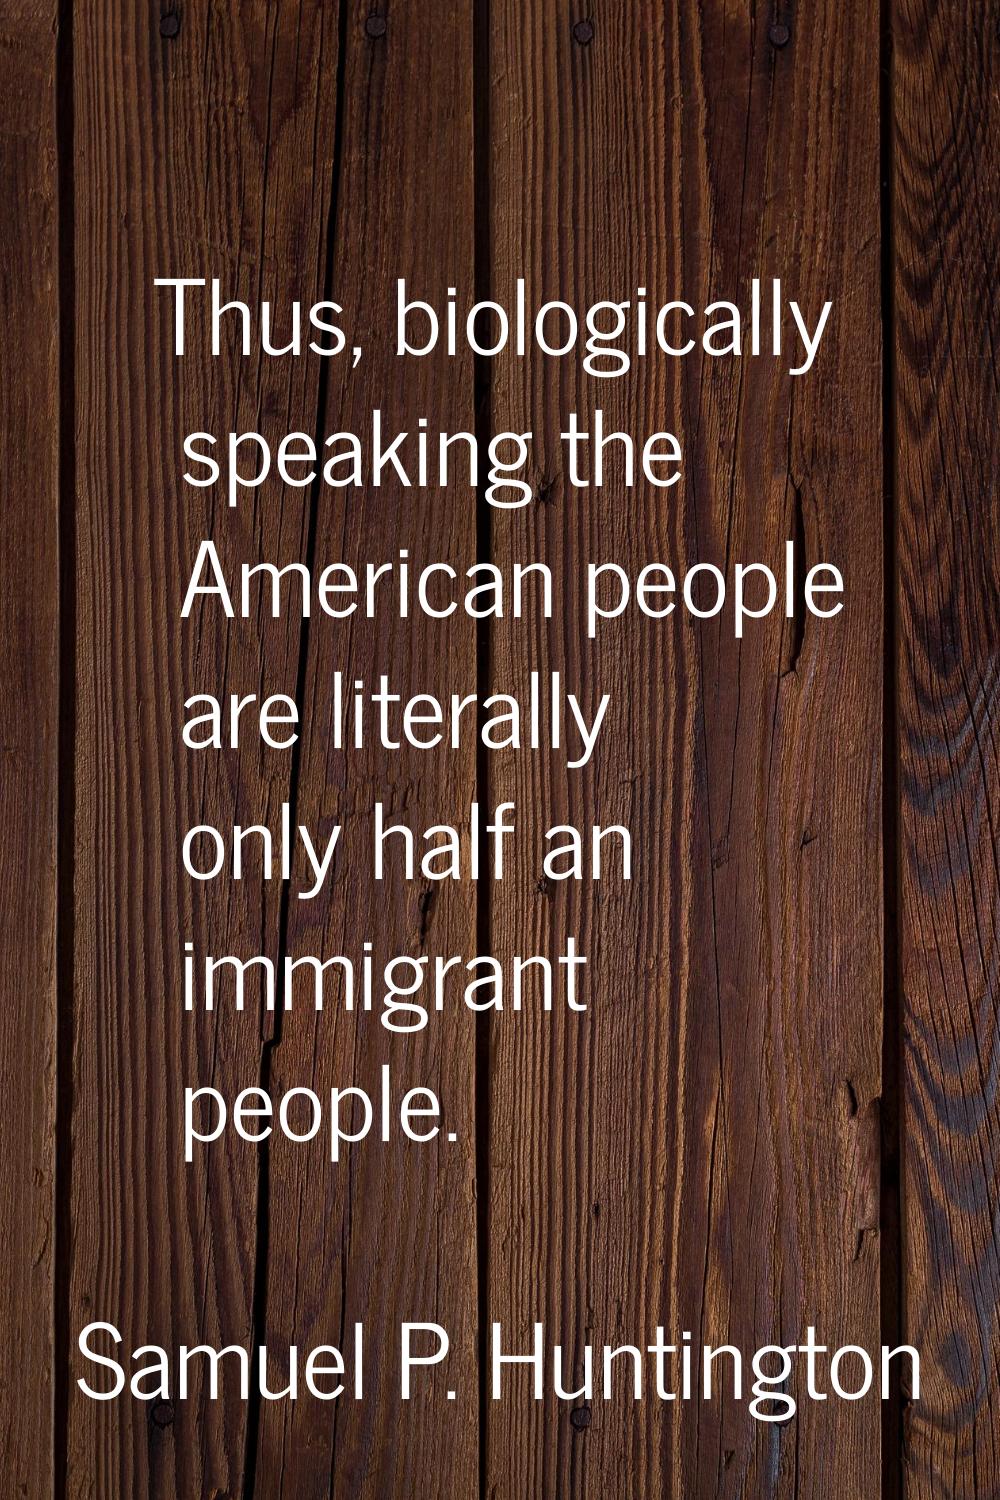 Thus, biologically speaking the American people are literally only half an immigrant people.